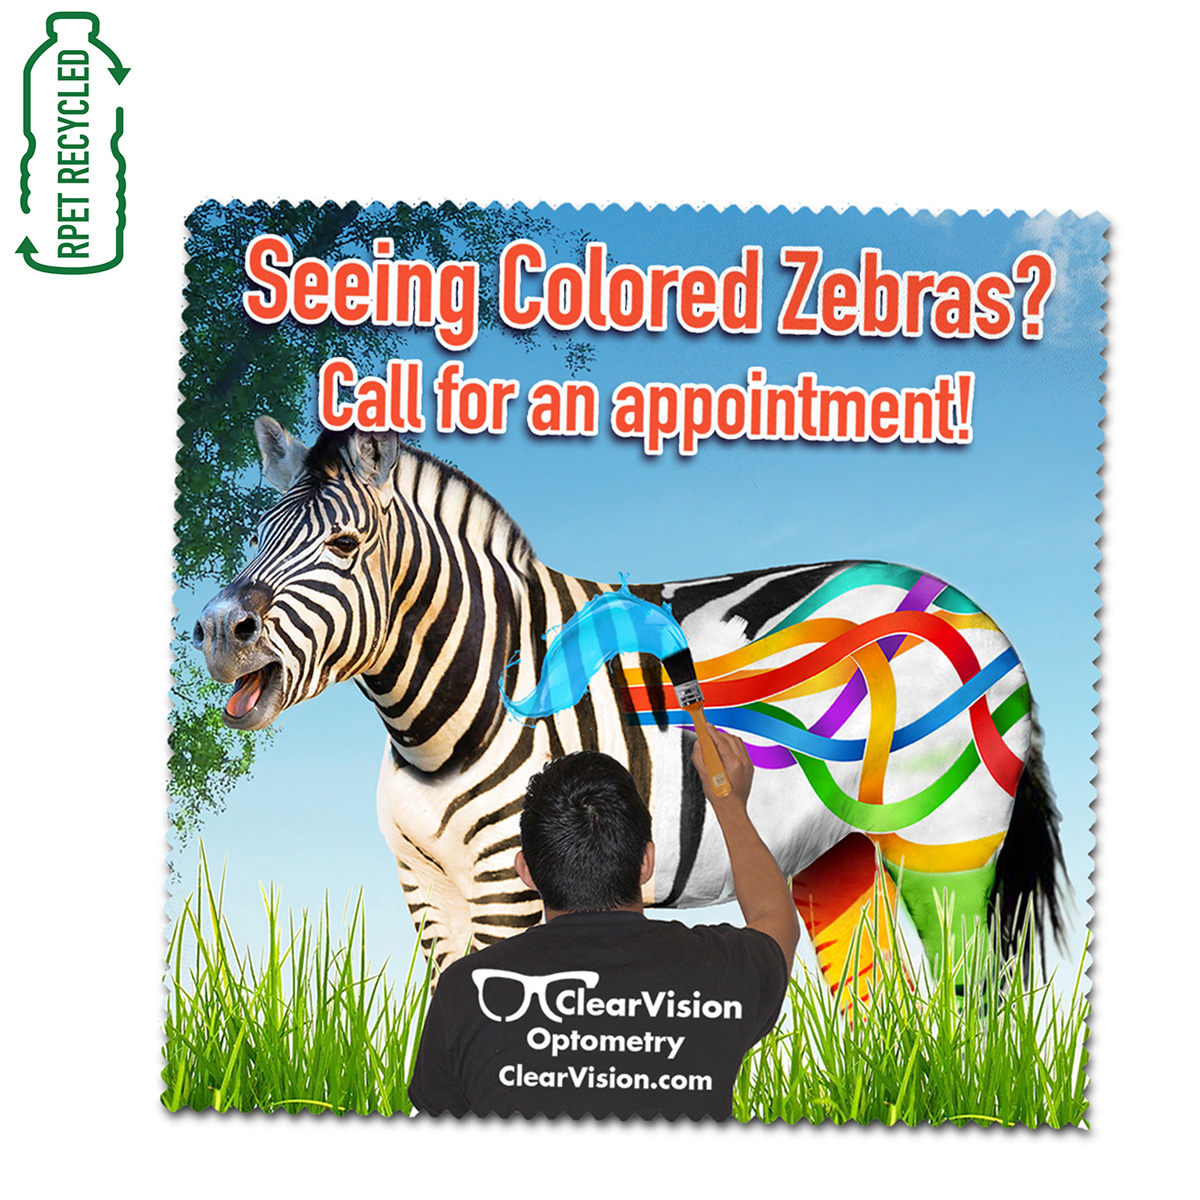 "The Full Color Napier"  - 5" x 5" Full Color Sublimation Microfiber Cleaning Cloth & Screen Cleaner